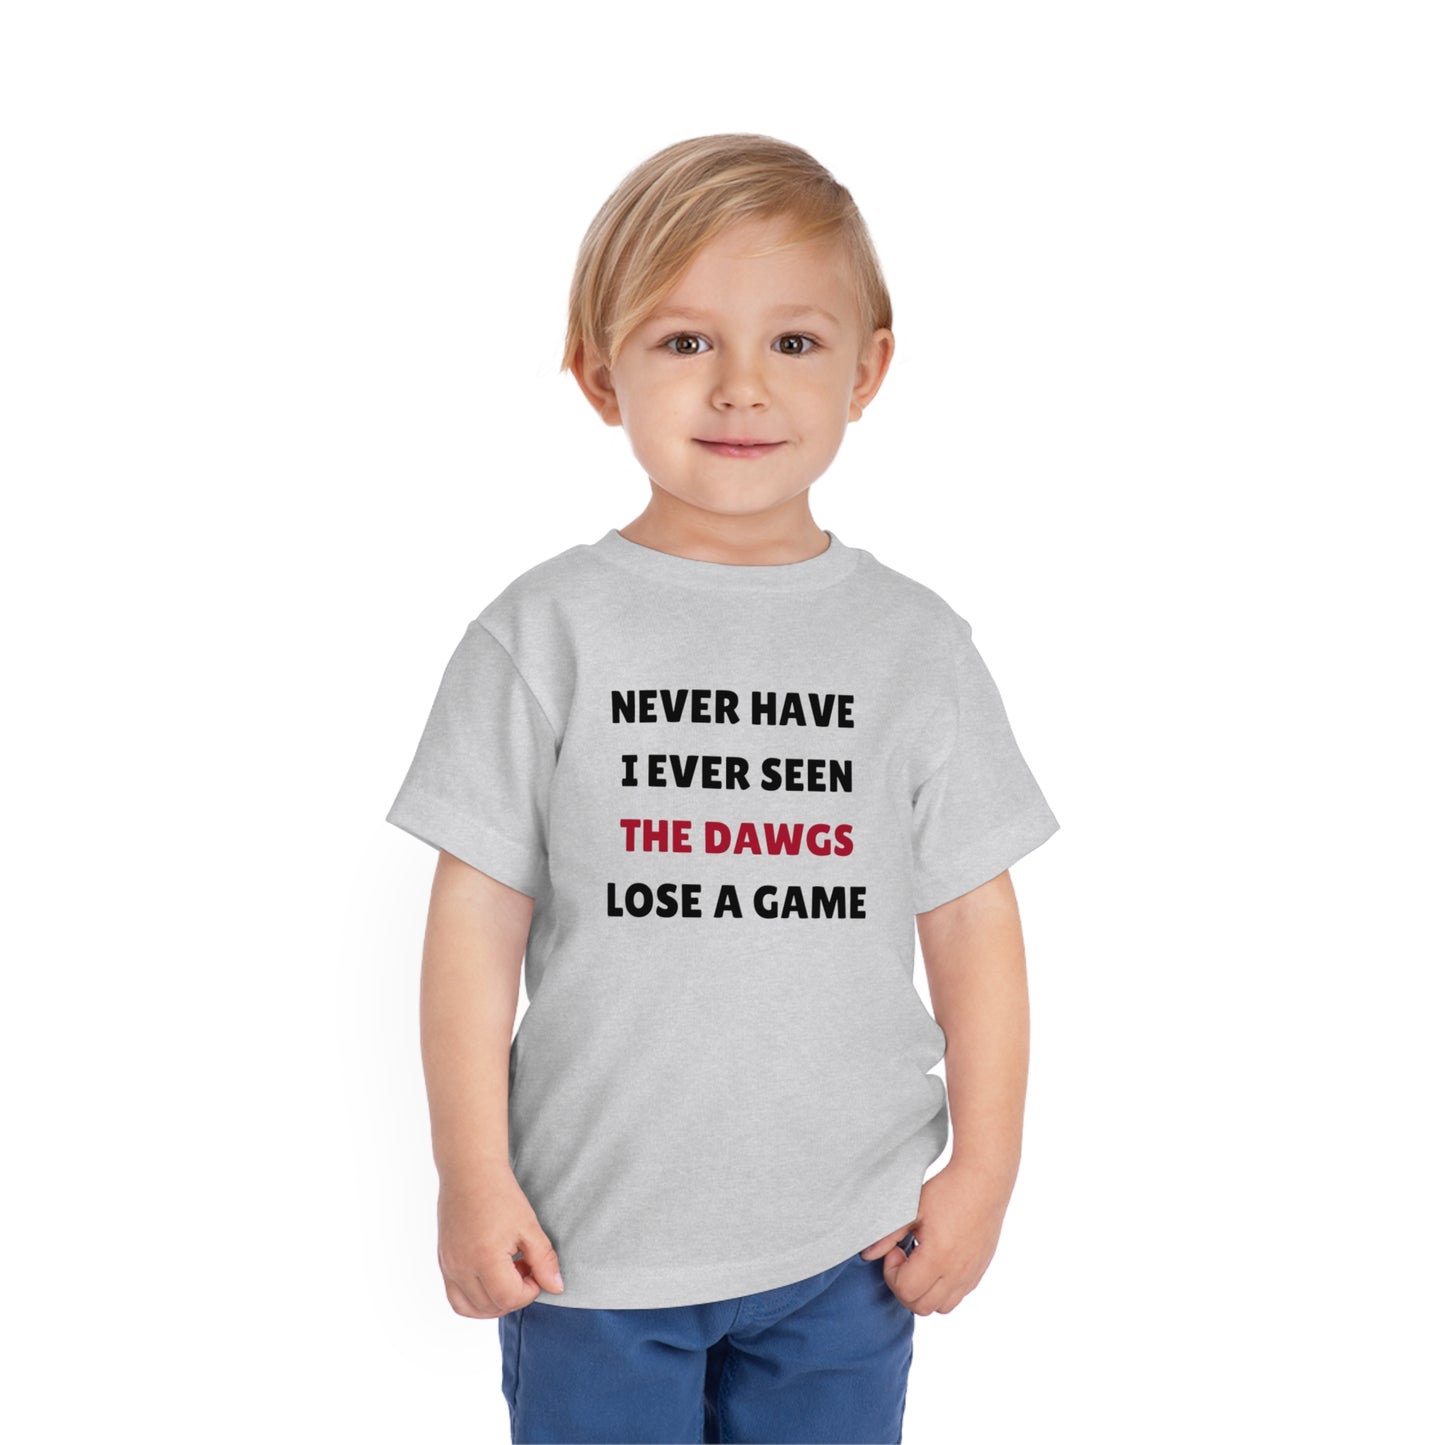 Georgia "Never Have I Ever" Toddler Tee